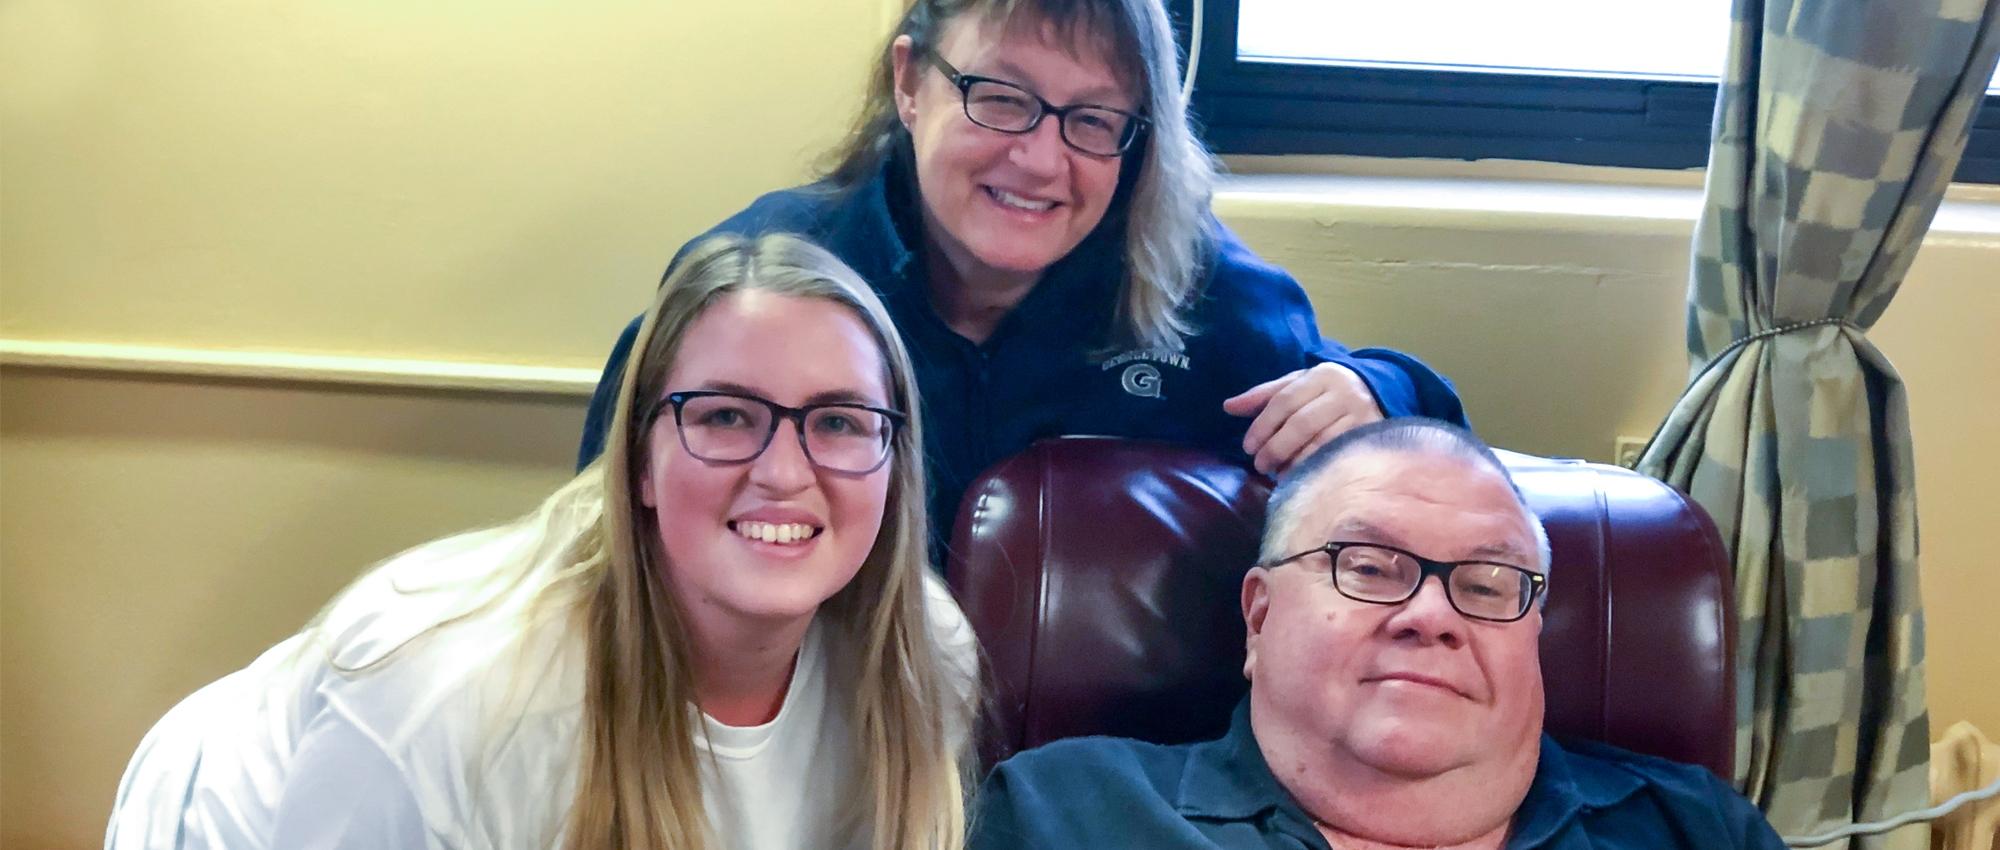 Image of Bruce Phinney with wife and daughter sitting in a recliner